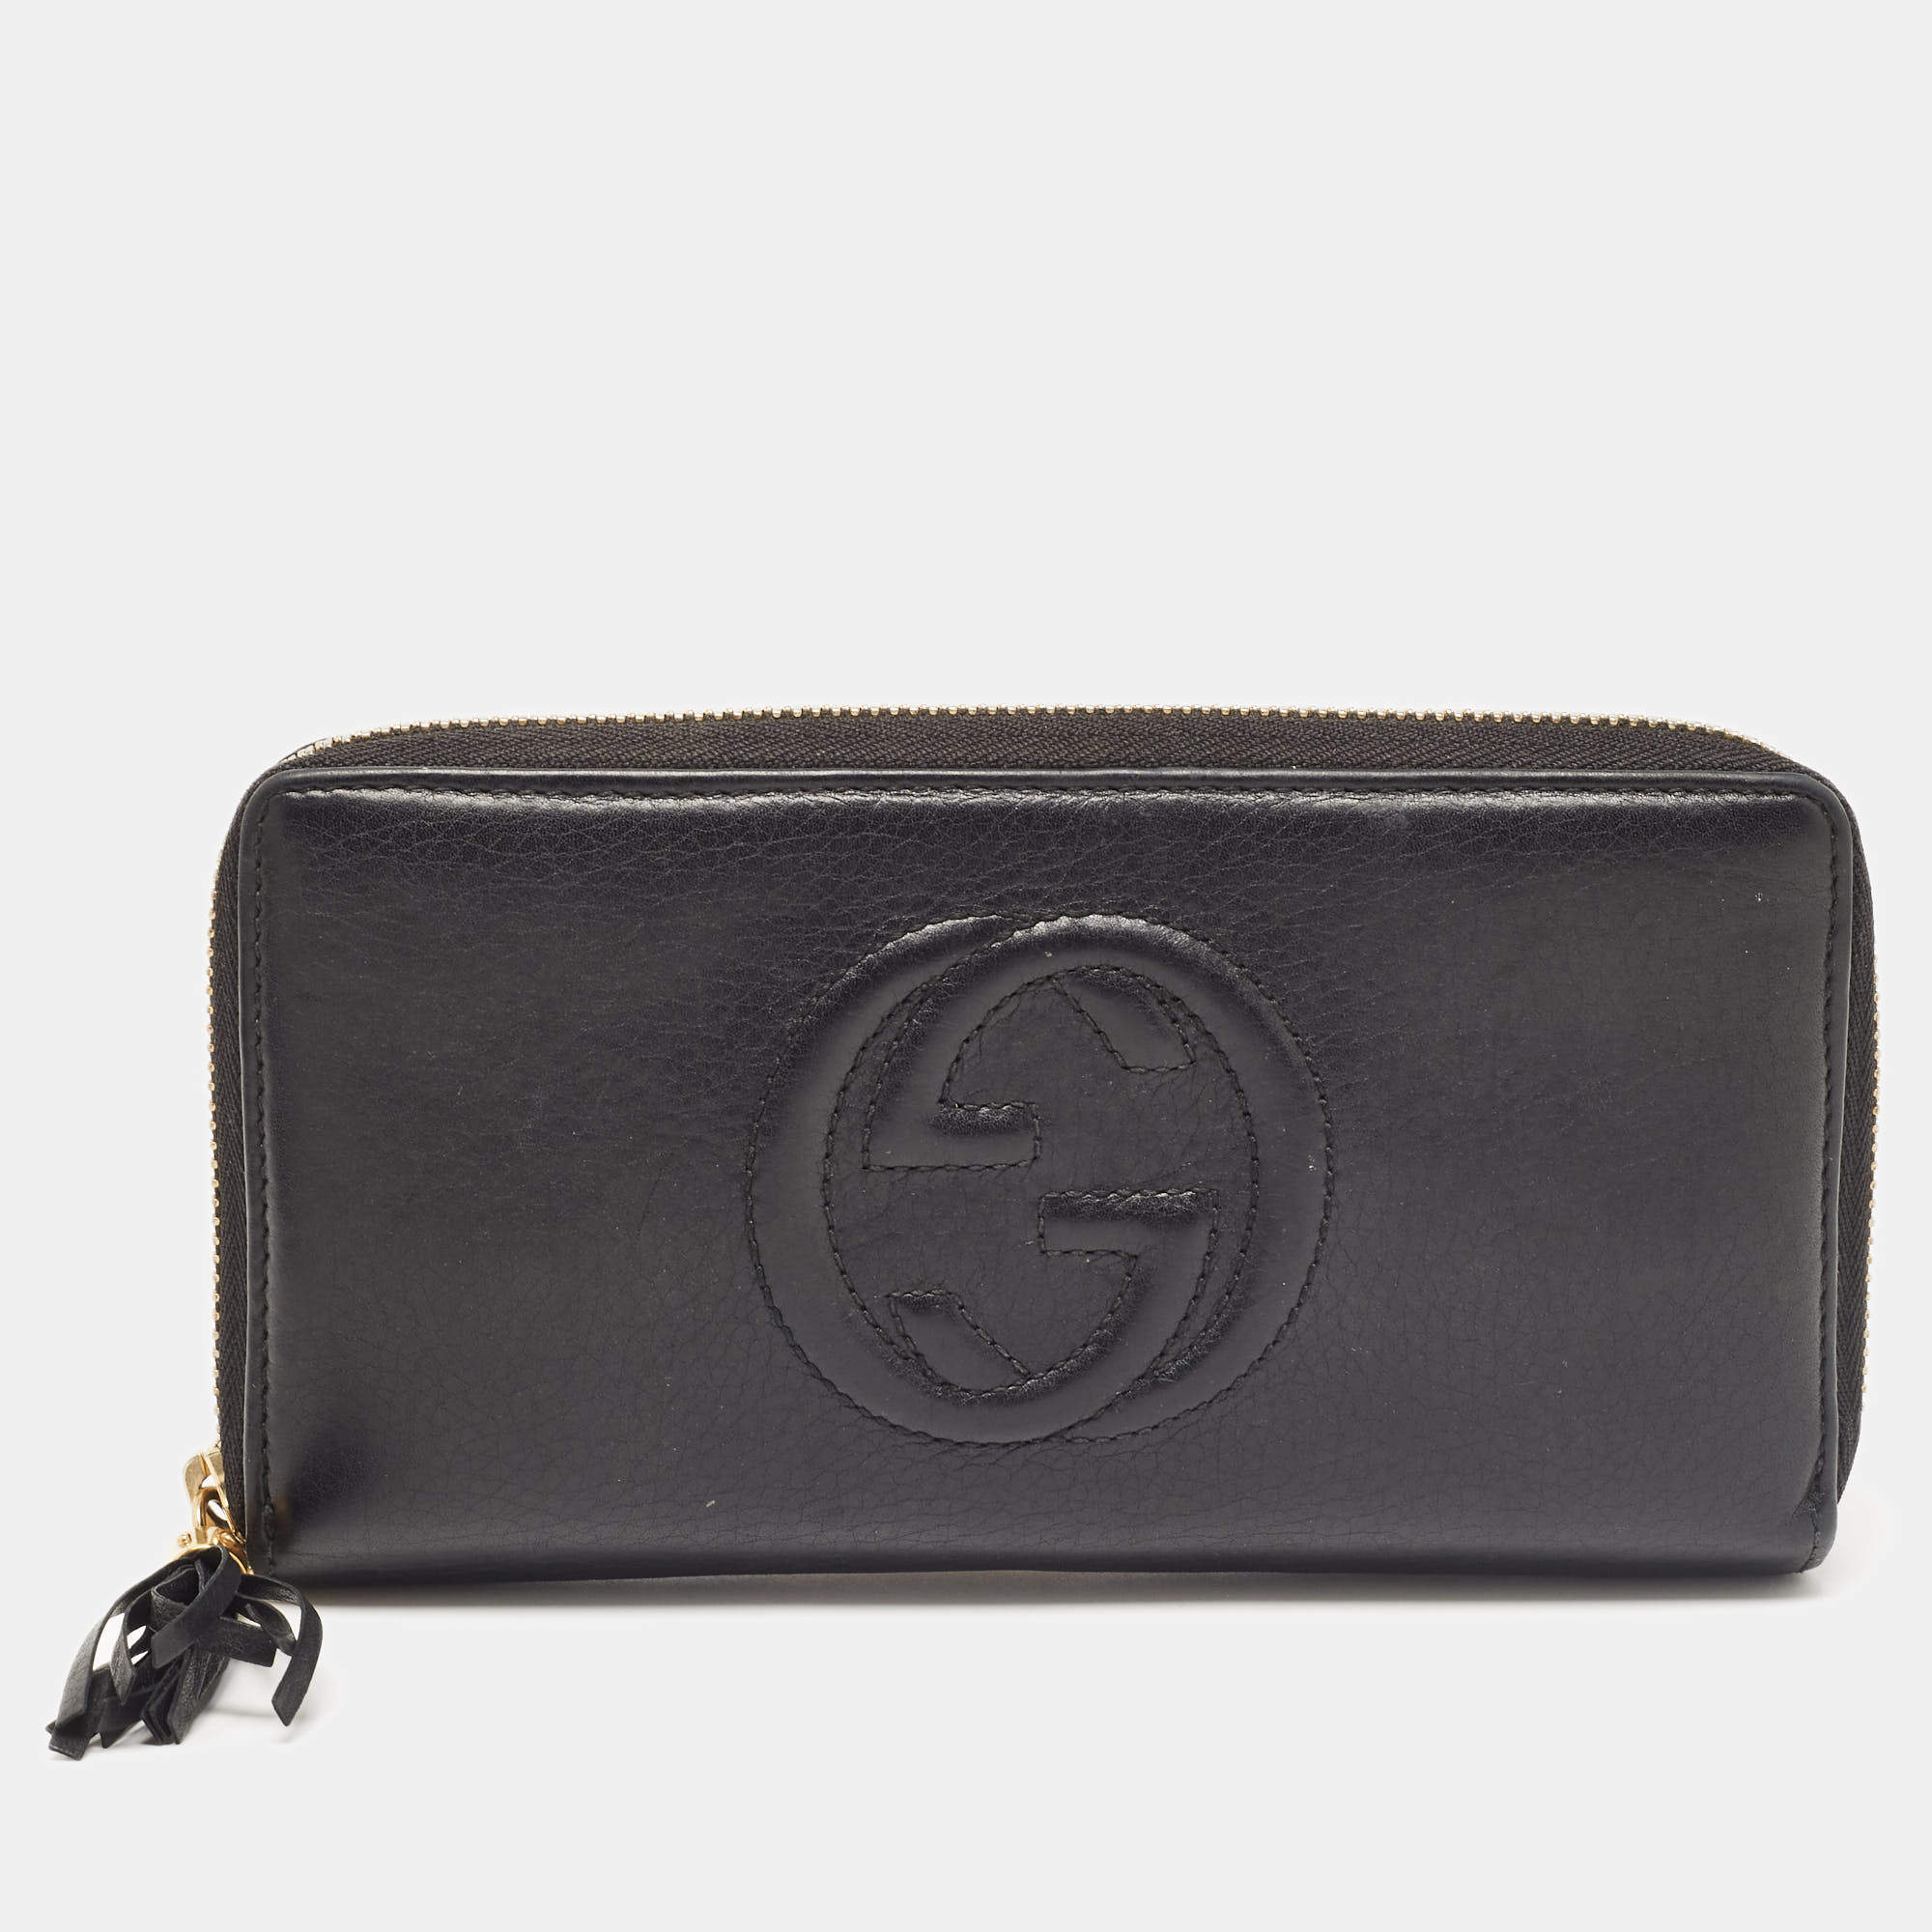 Gucci Black Leather Soho Continental Wallet